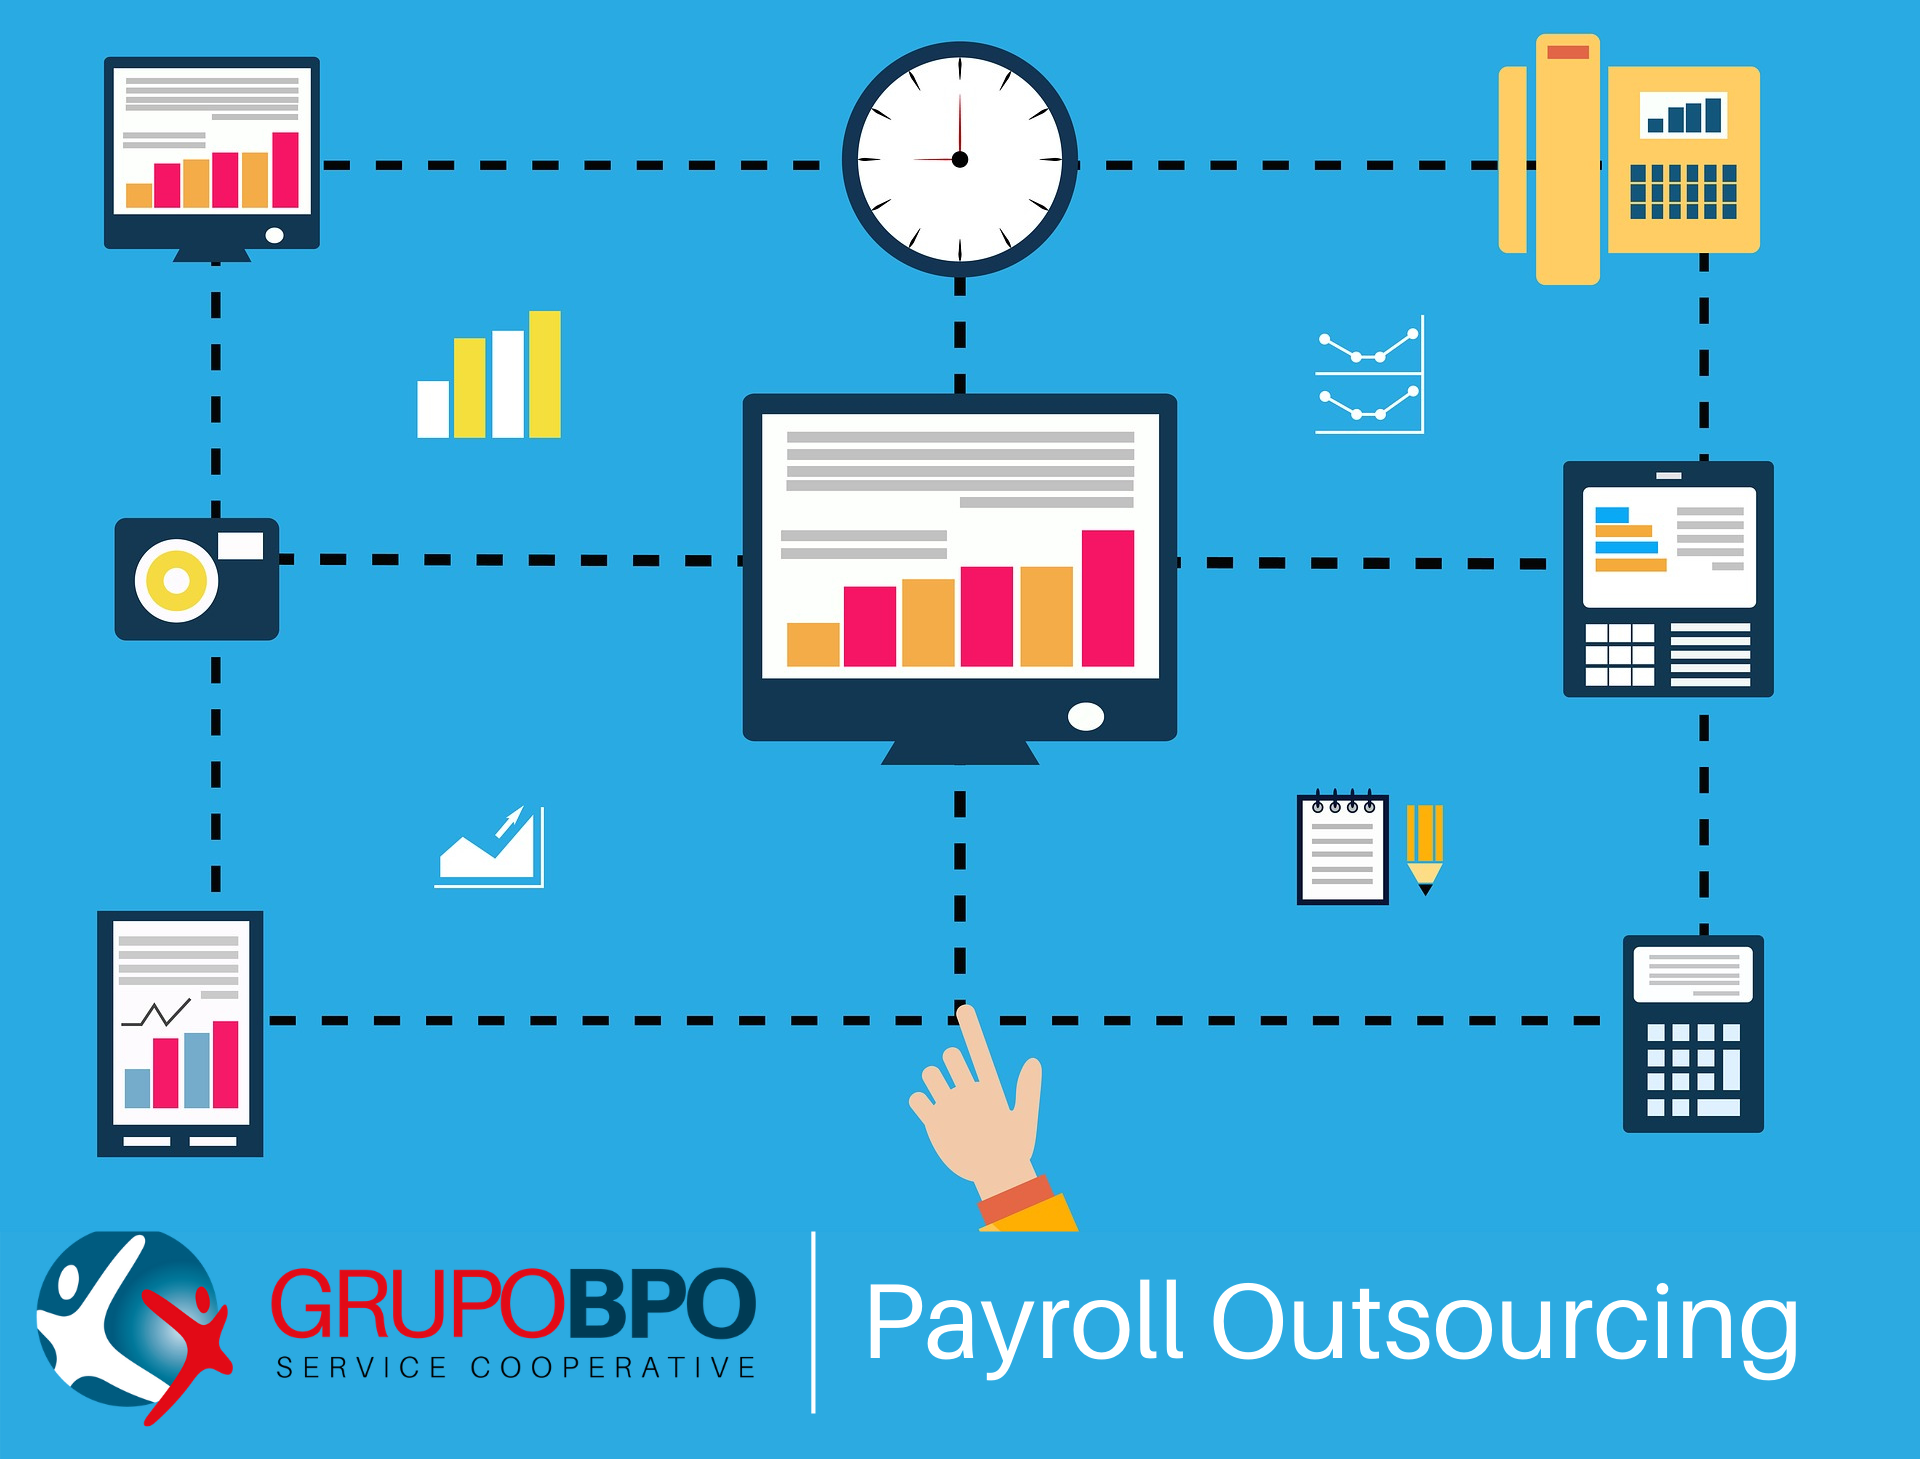 Payroll Companies in the Philippines Use Top Payroll Software